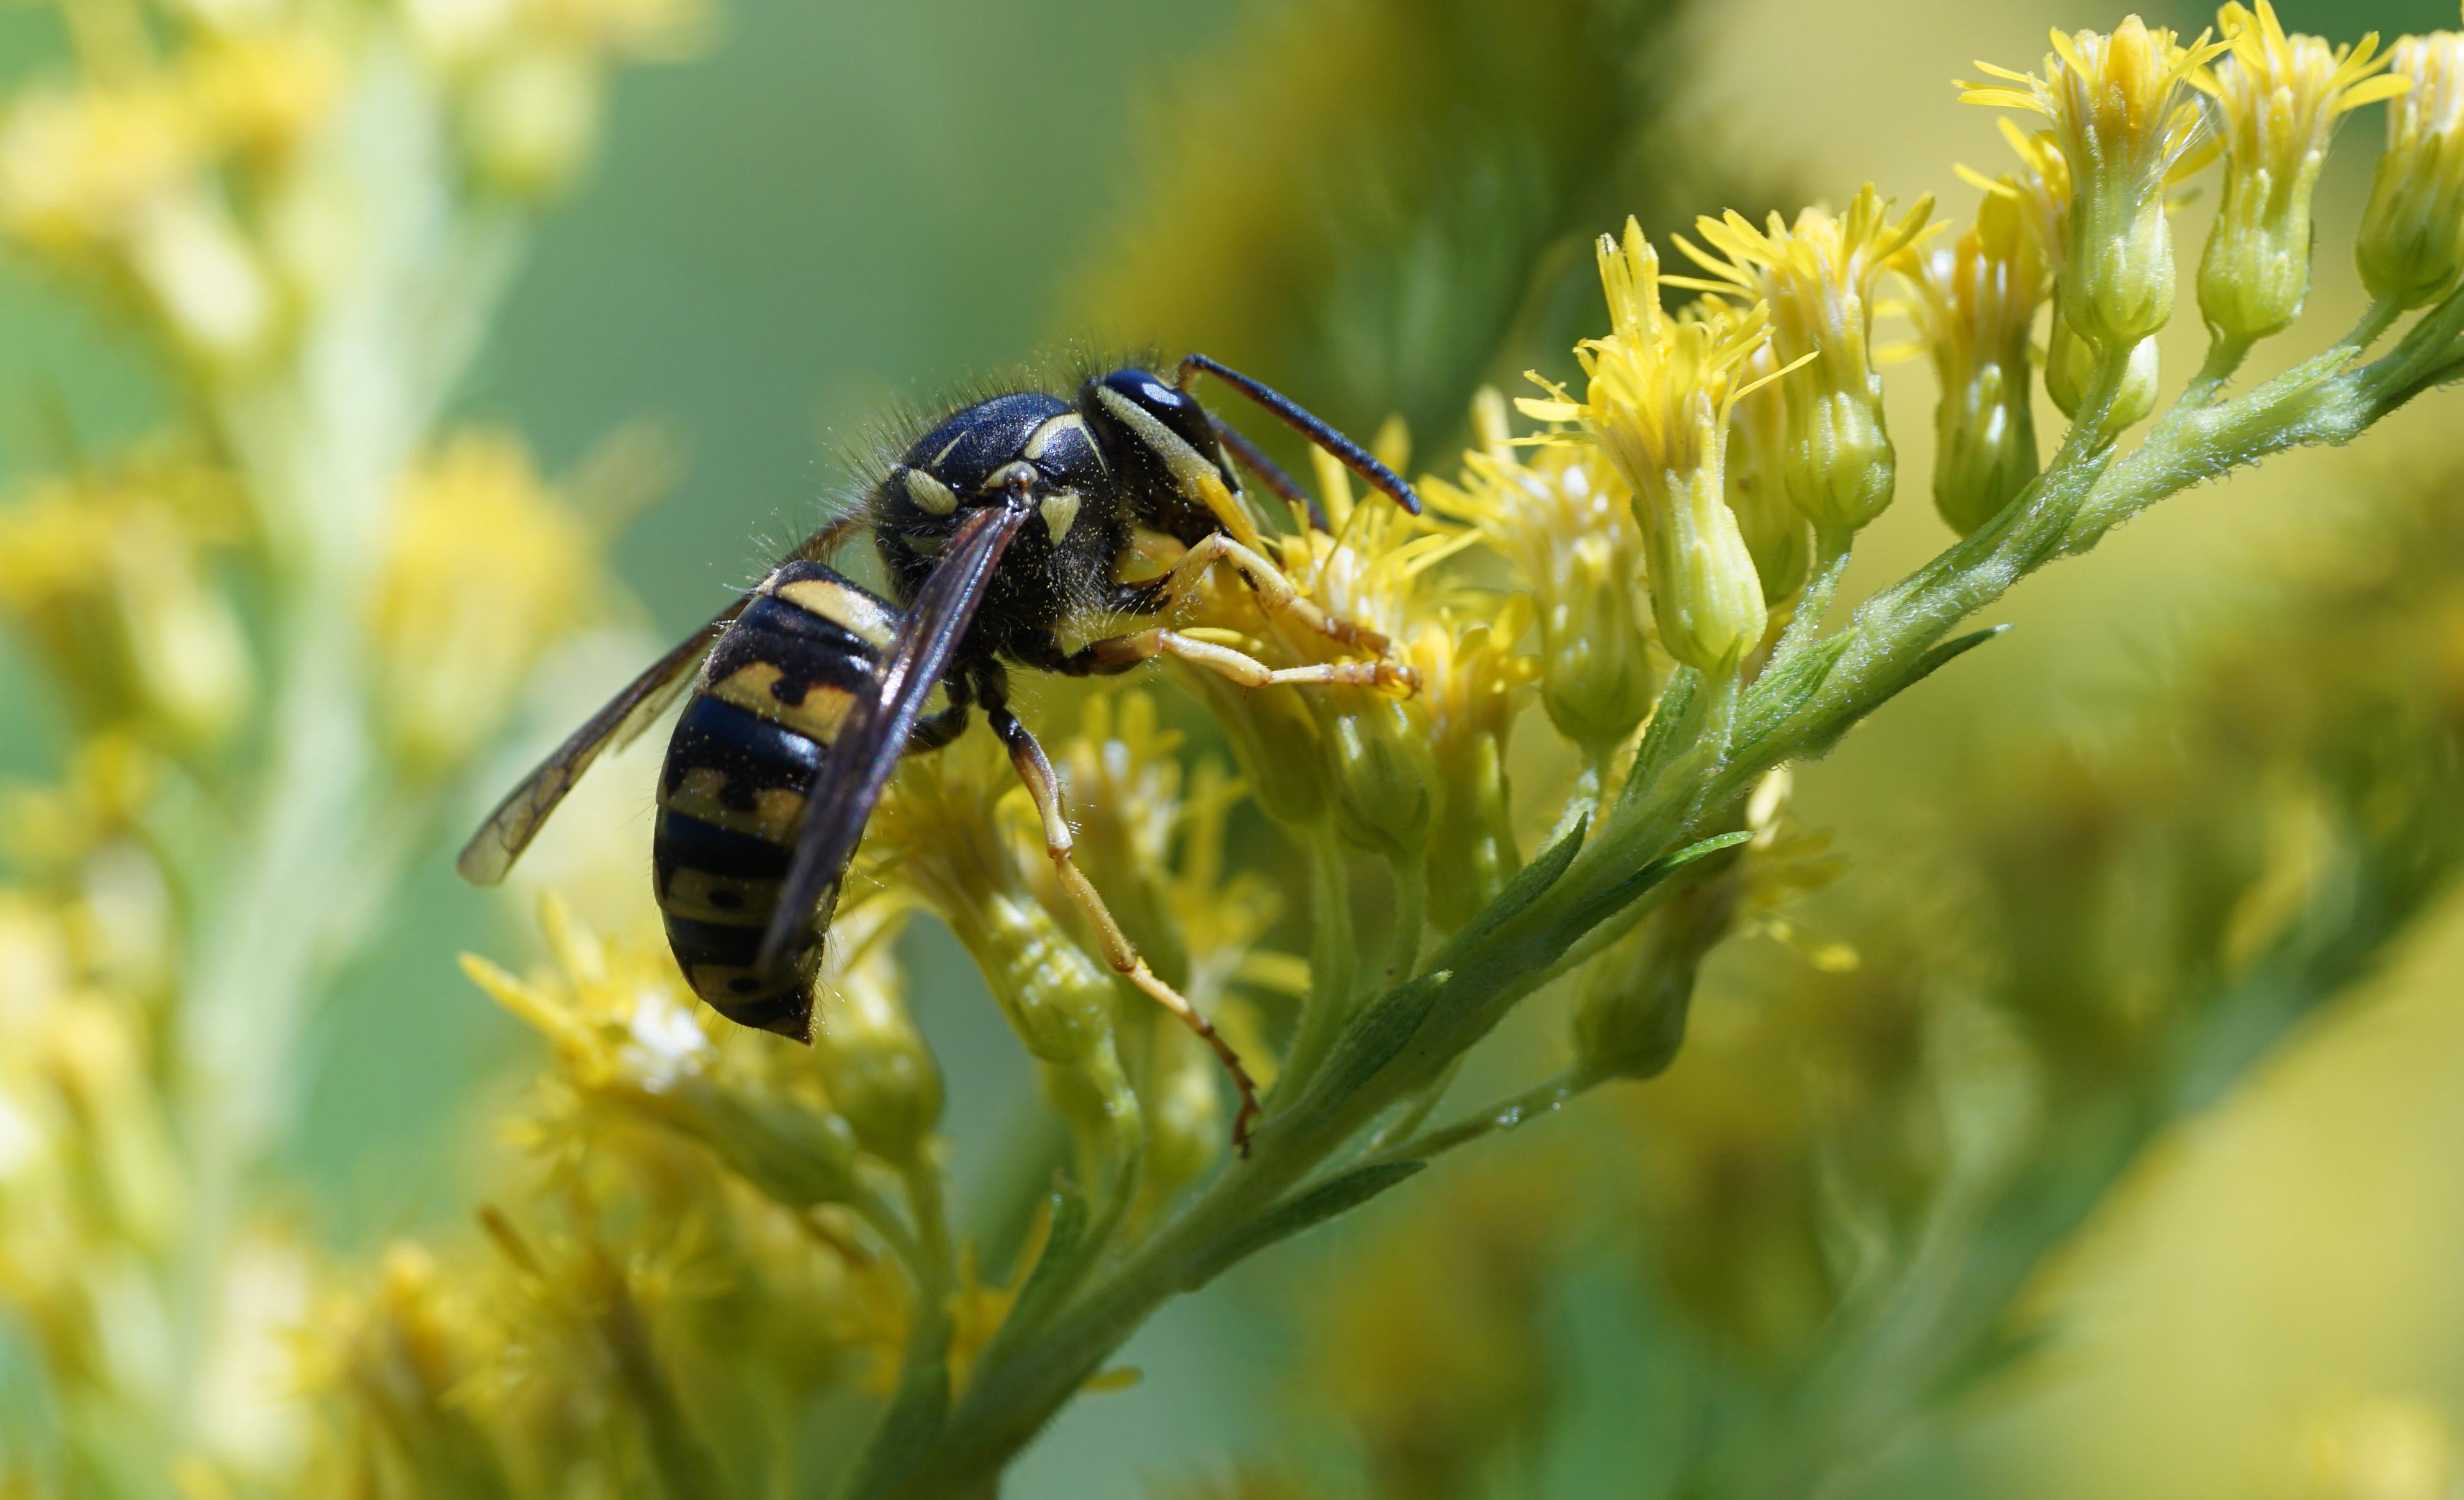 A yellow jacket wasp on a flower.